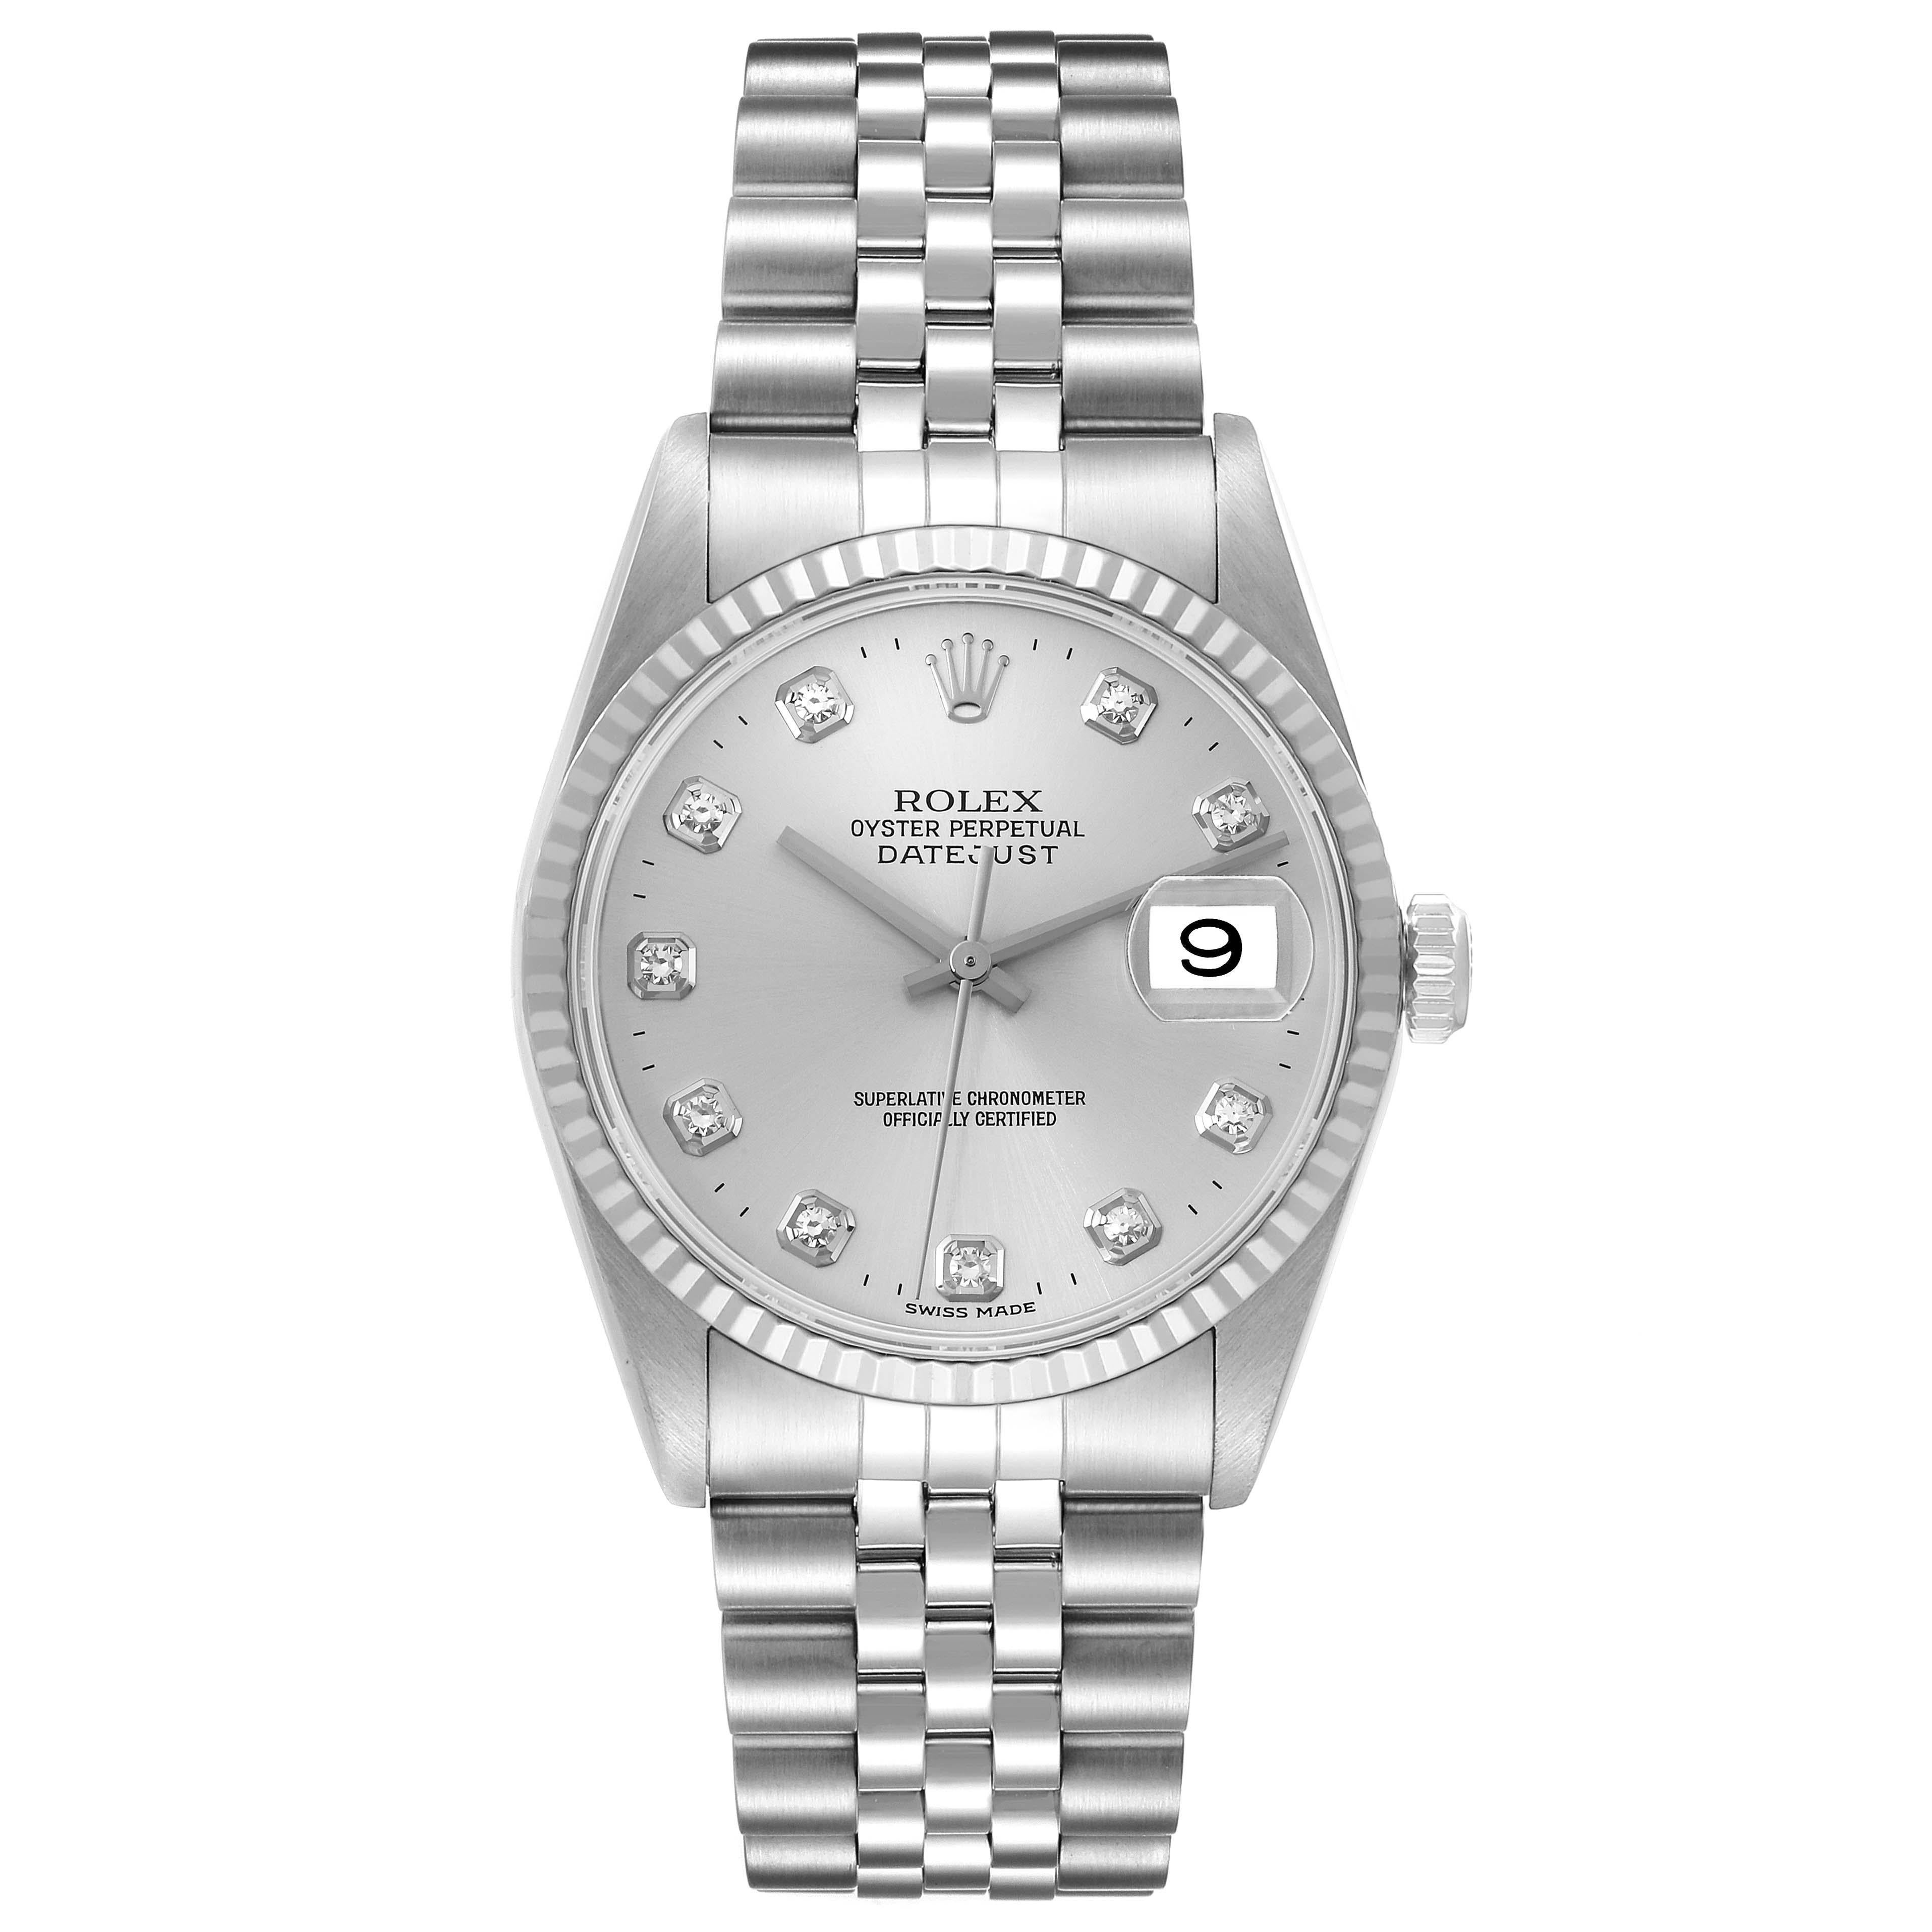 Rolex Datejust Steel White Gold Diamond Dial Mens Watch 16234. Officially certified chronometer automatic self-winding movement. Stainless steel oyster case 36.0 mm in diameter. Rolex logo on a crown. 18k white gold fluted bezel. Scratch resistant